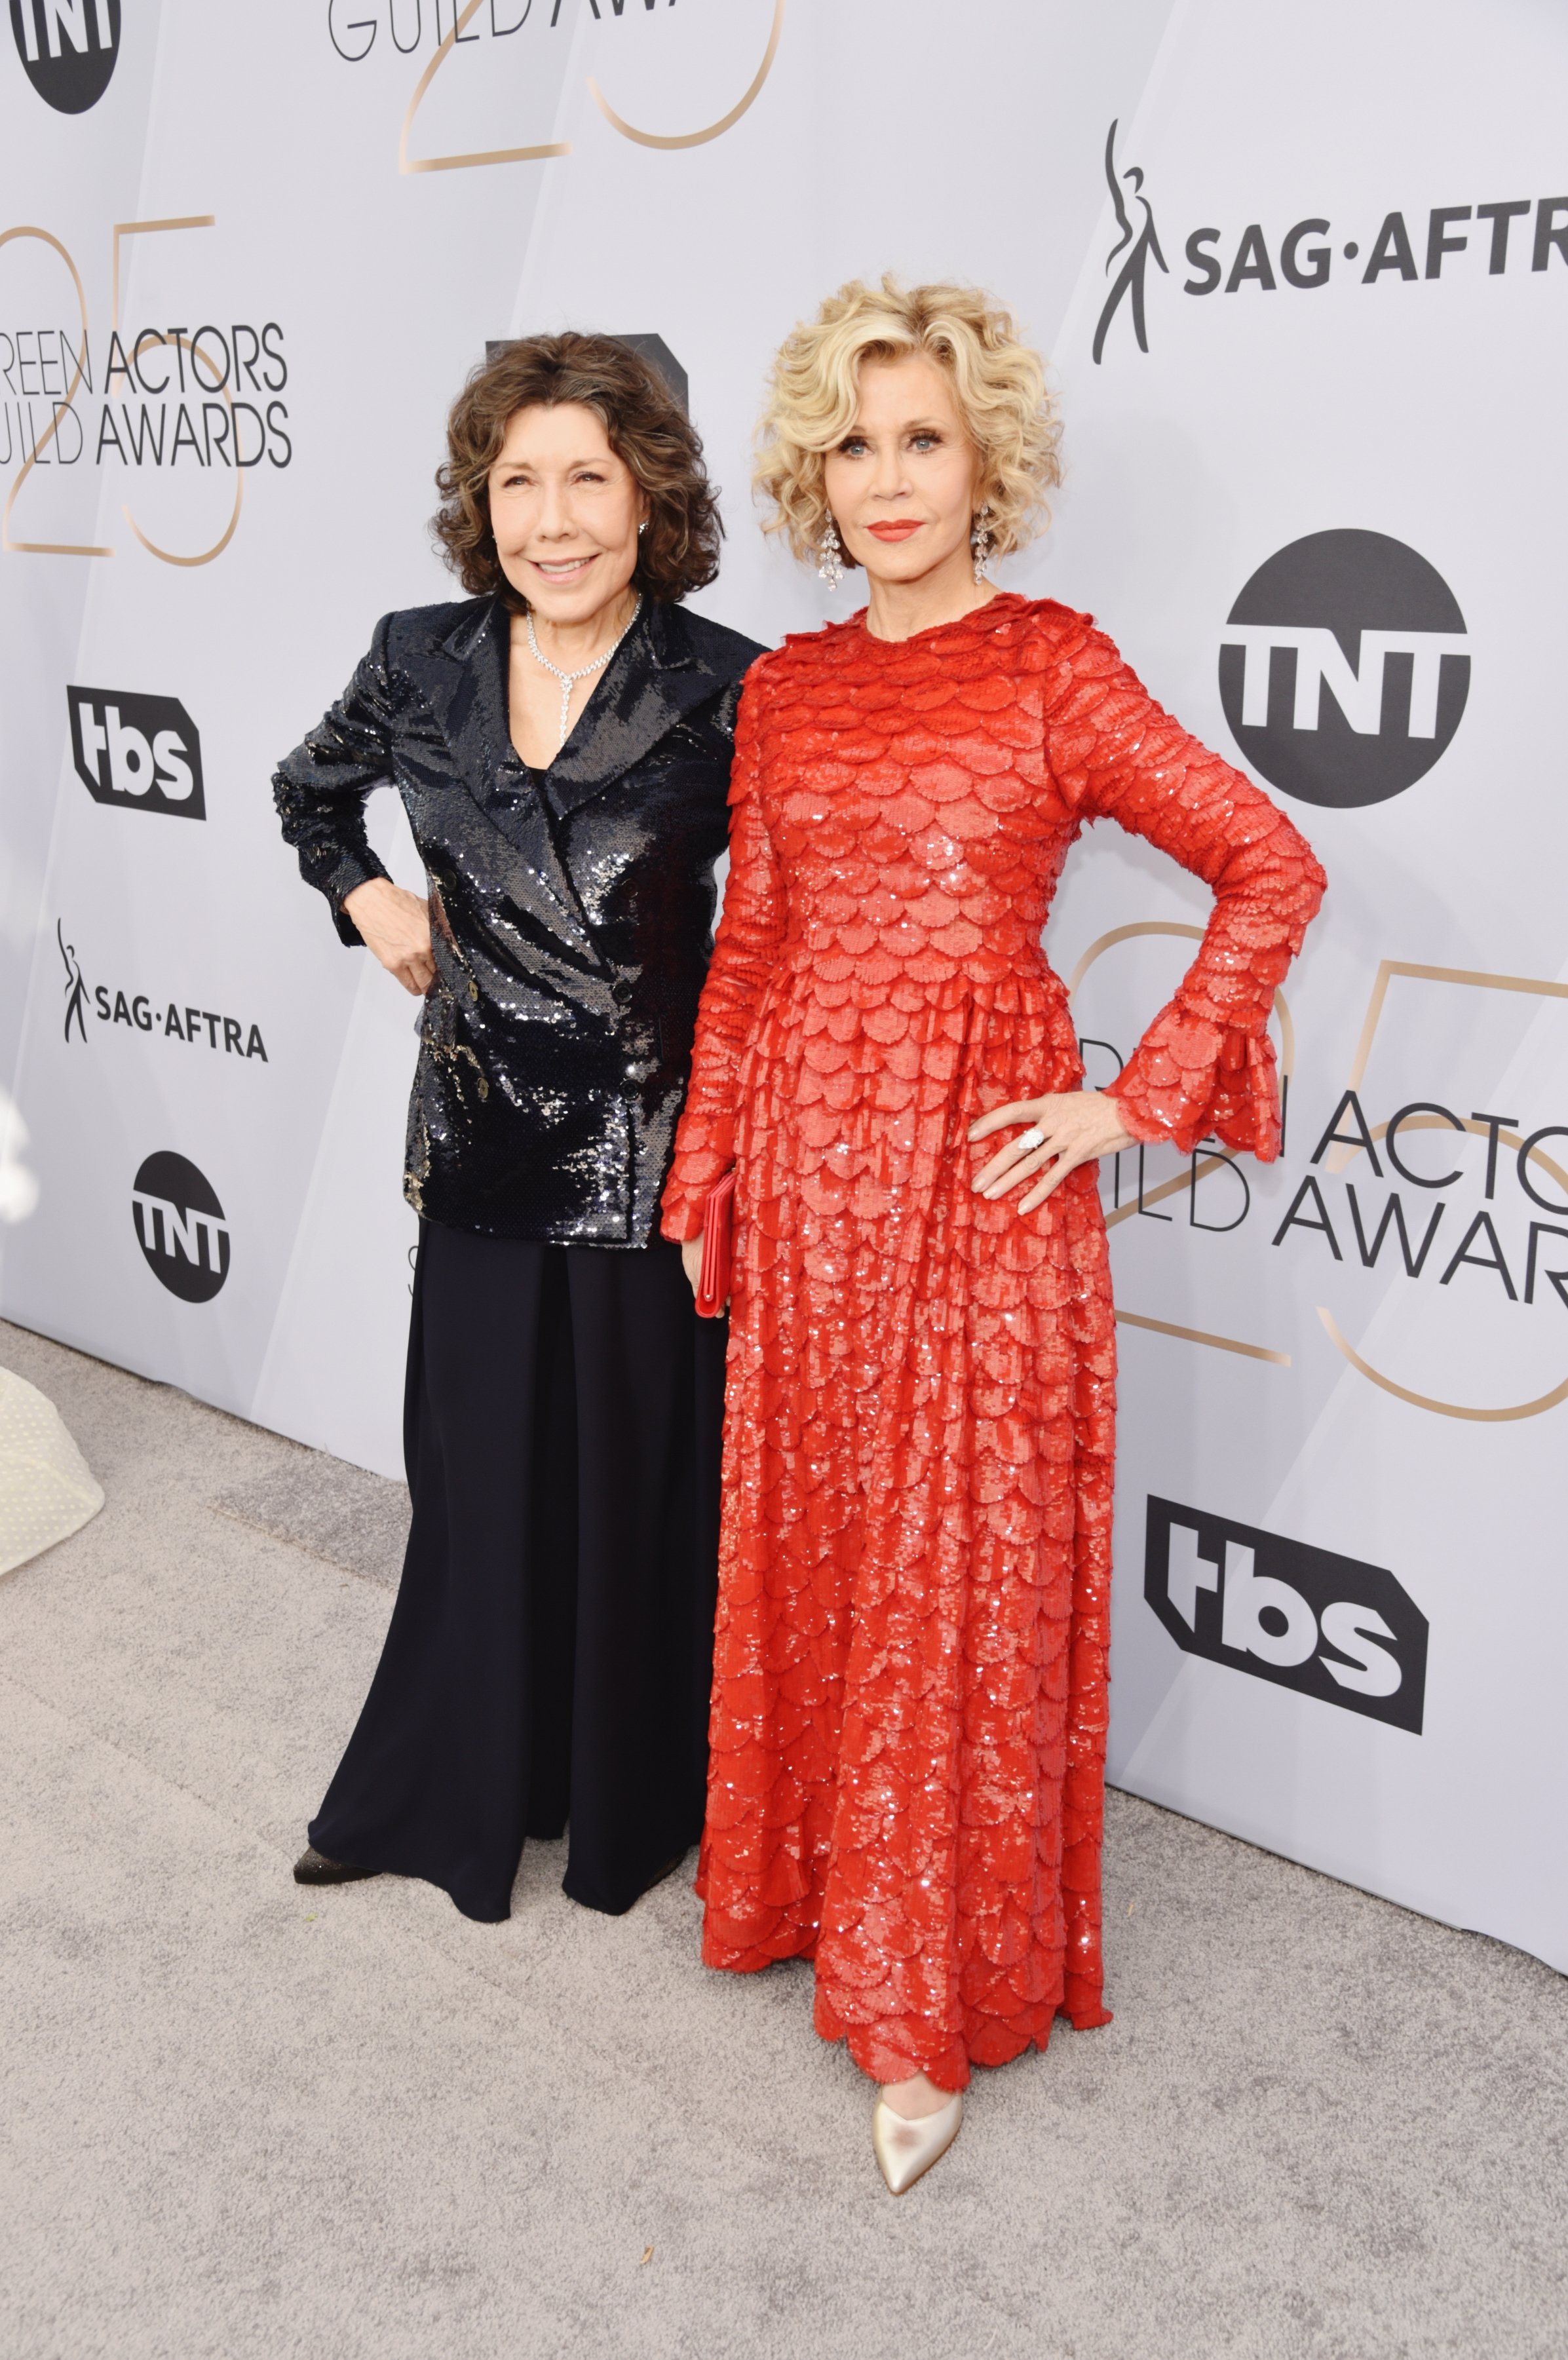 Lily Tomlin and Jane Fonda arrive at the 25th Annual Screen Actors Guild Awards on January 27, 2019 | Photo: GettyImages 